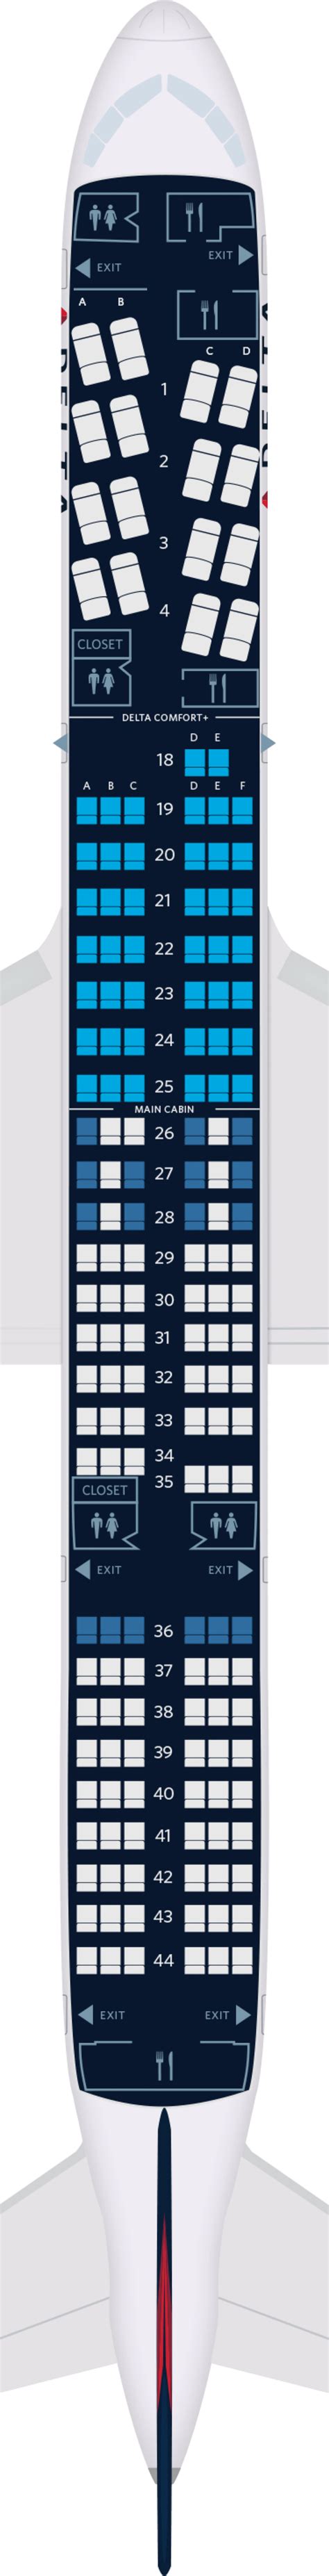 Delta Airlines Seating Chart Map Of Colorado - vrogue.co